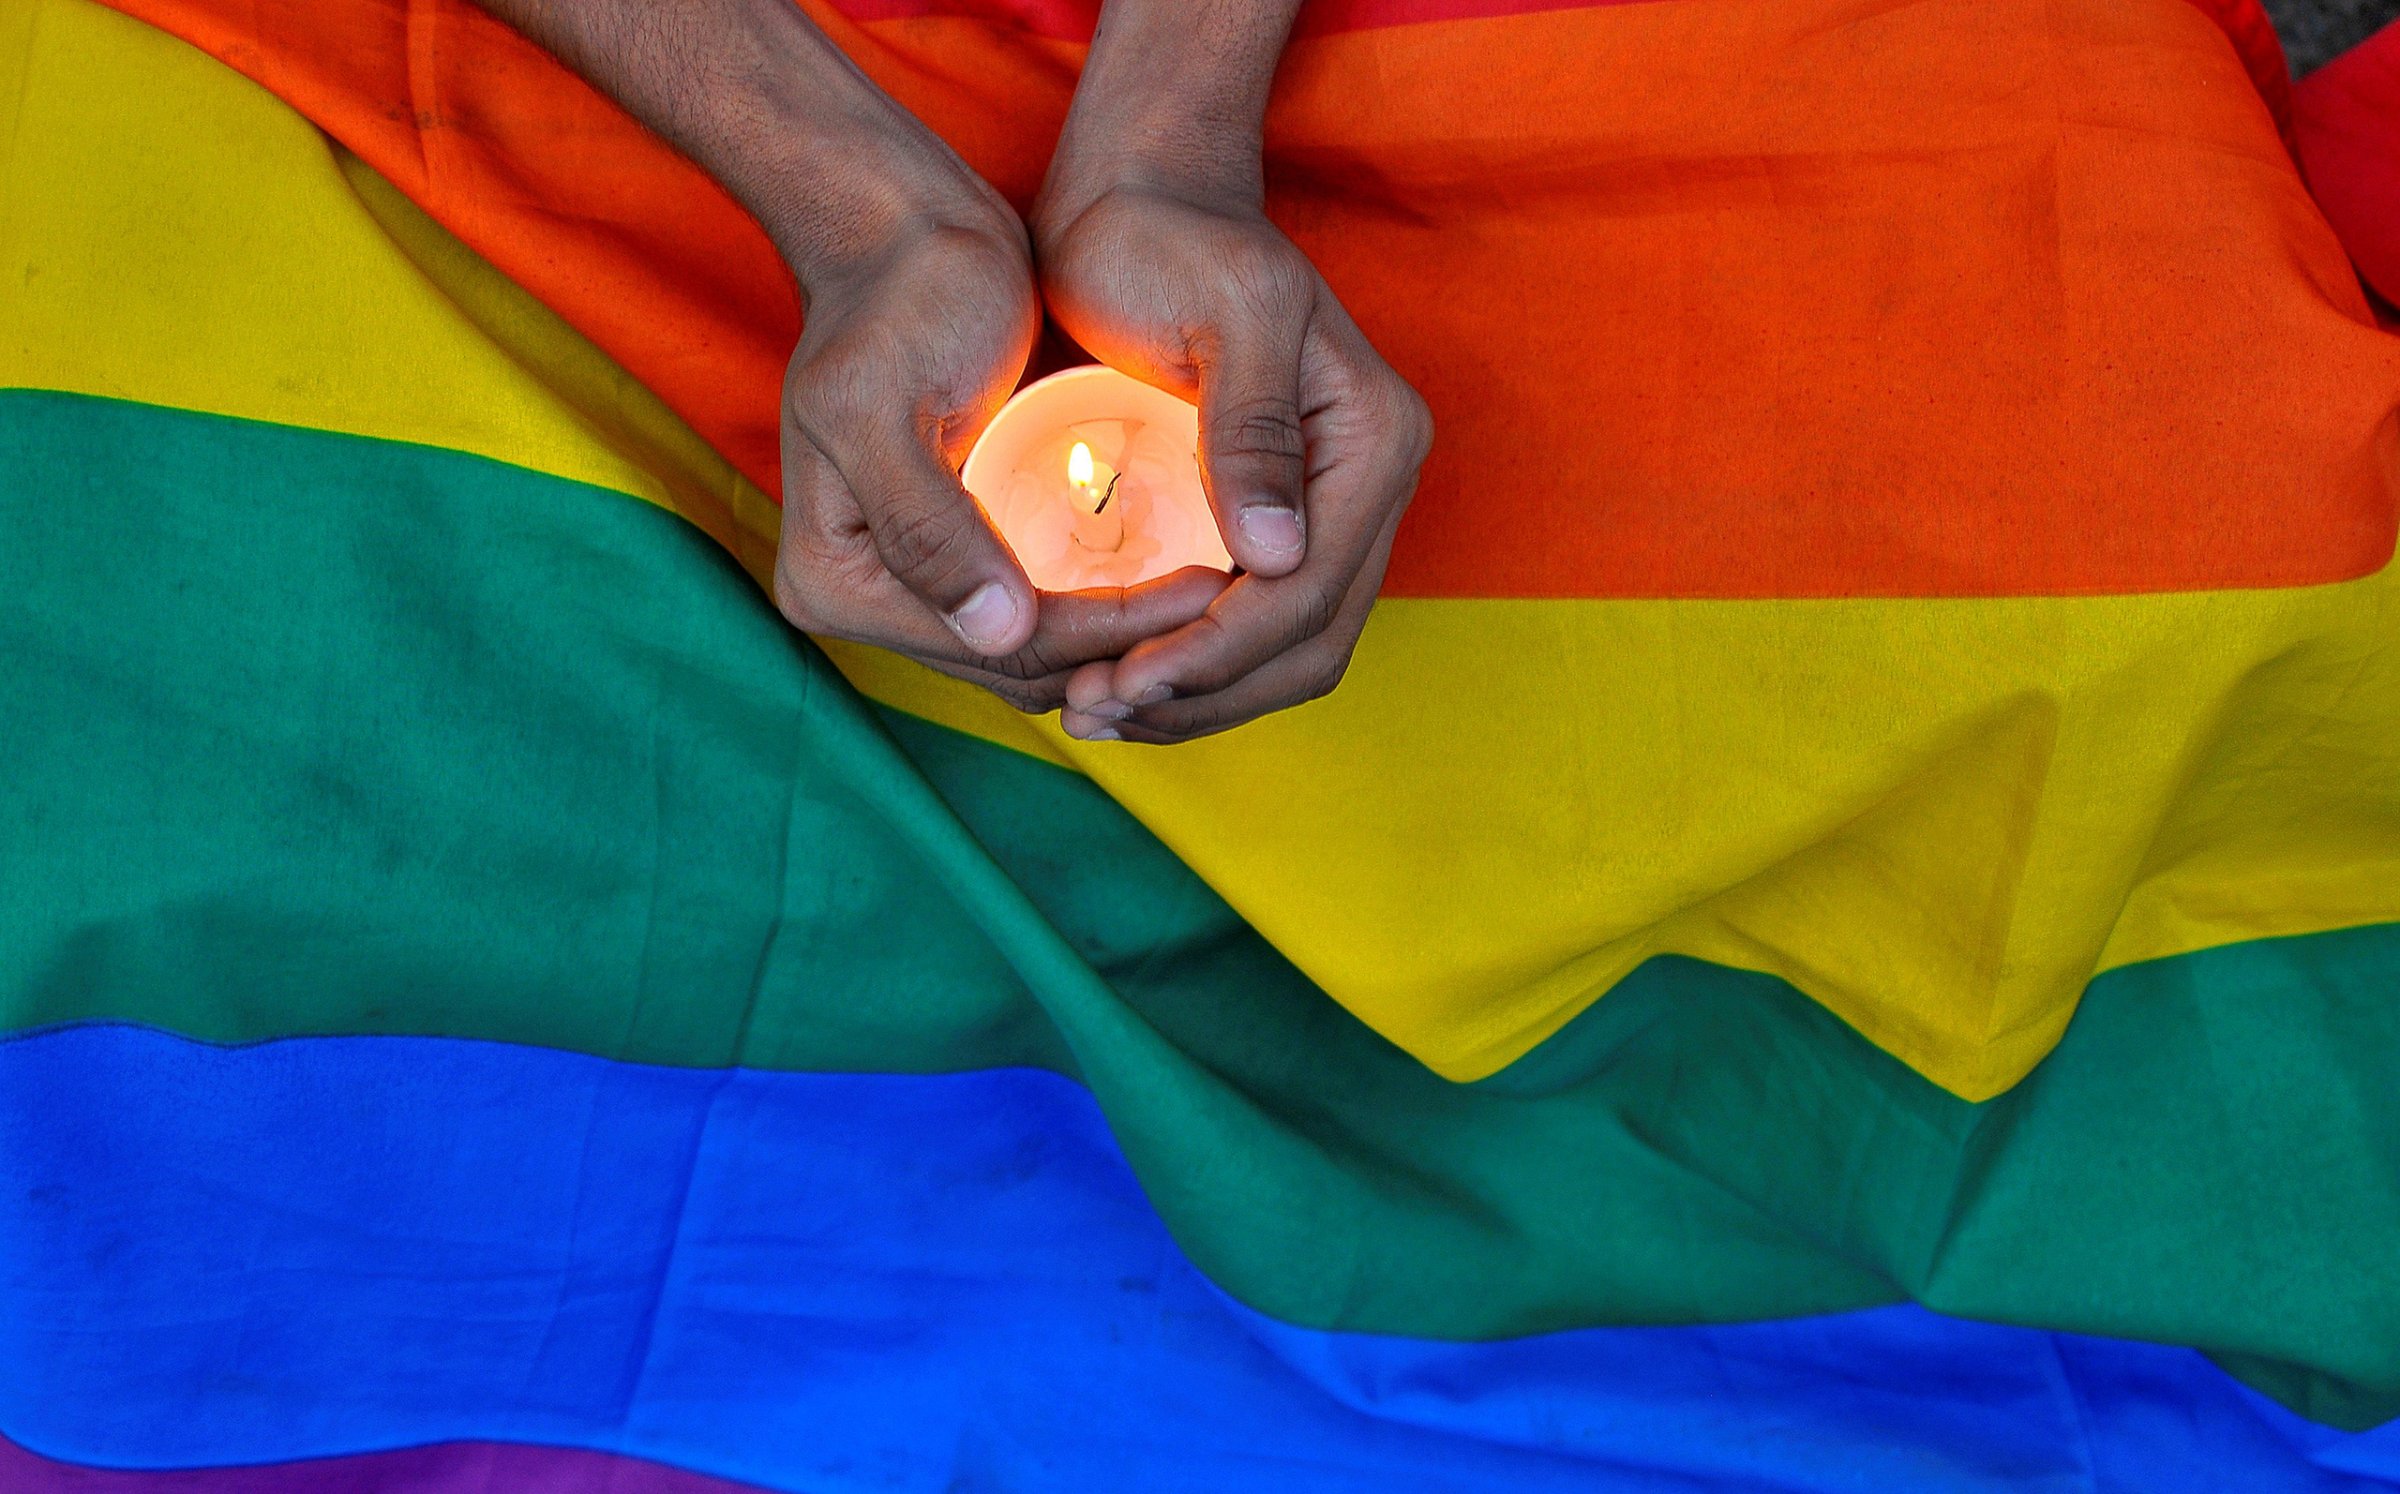 A member of the LGBT community in Bengalaru holds a candle during a memorial service following a mass shooting at the Pulse gay nightclub in Orlando, in India June 14, 2016.